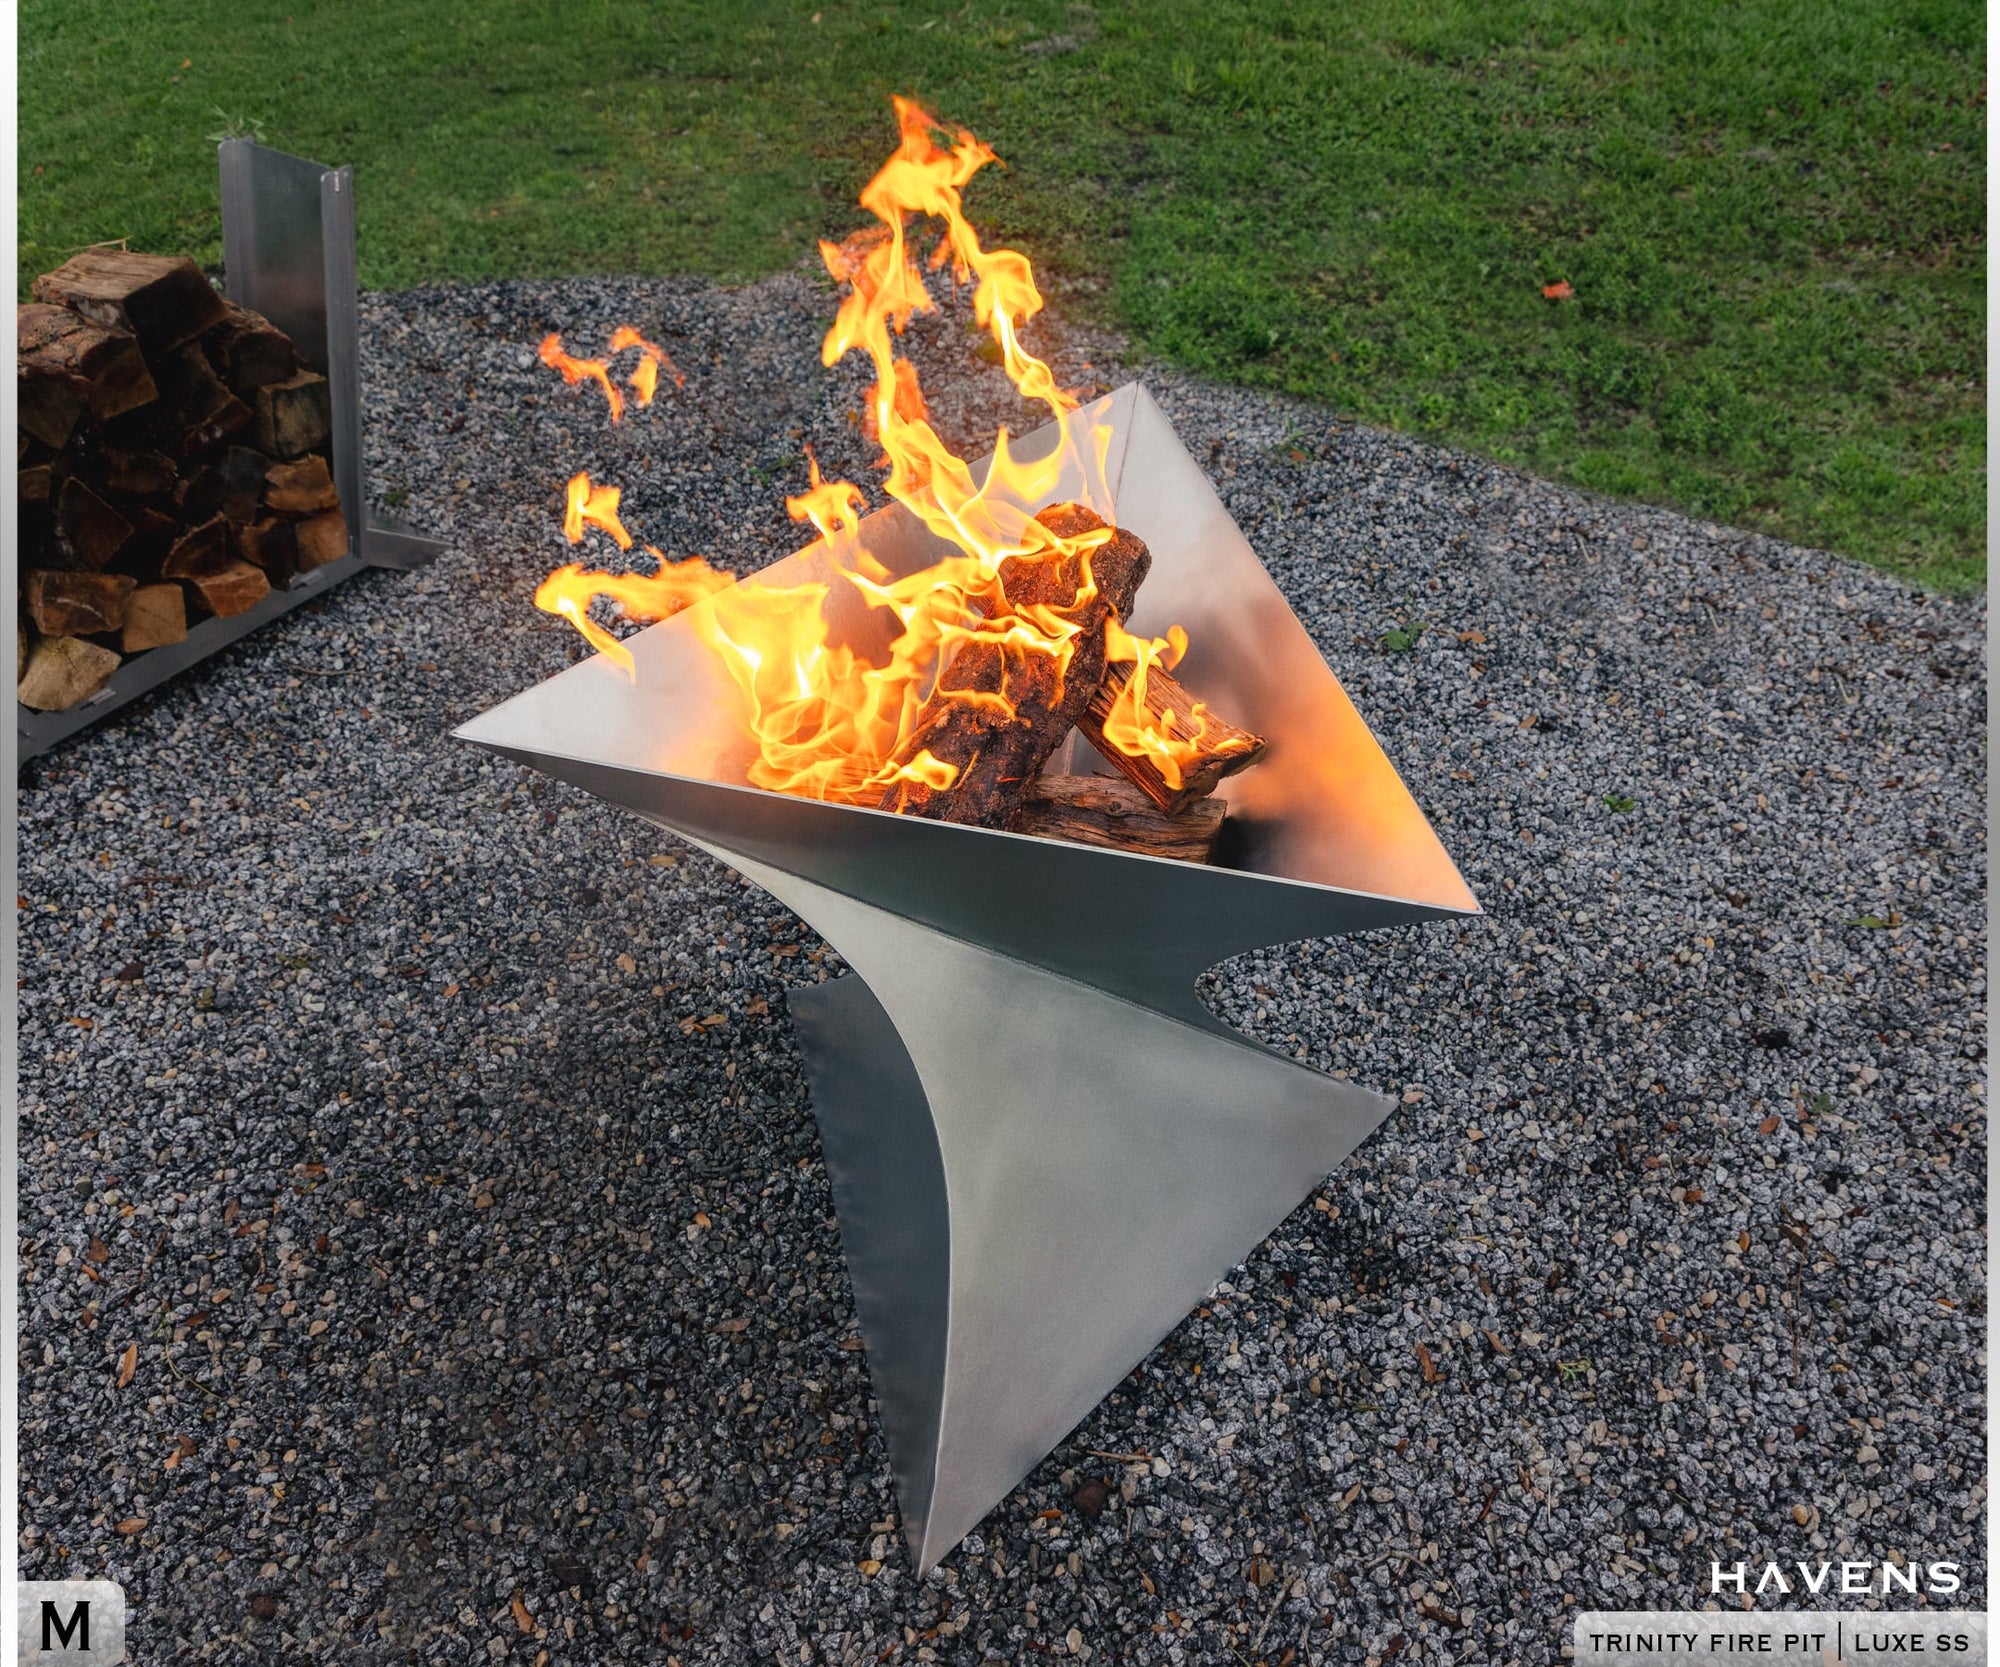 Trinity Fire Pit - Stainless Steel - Havens